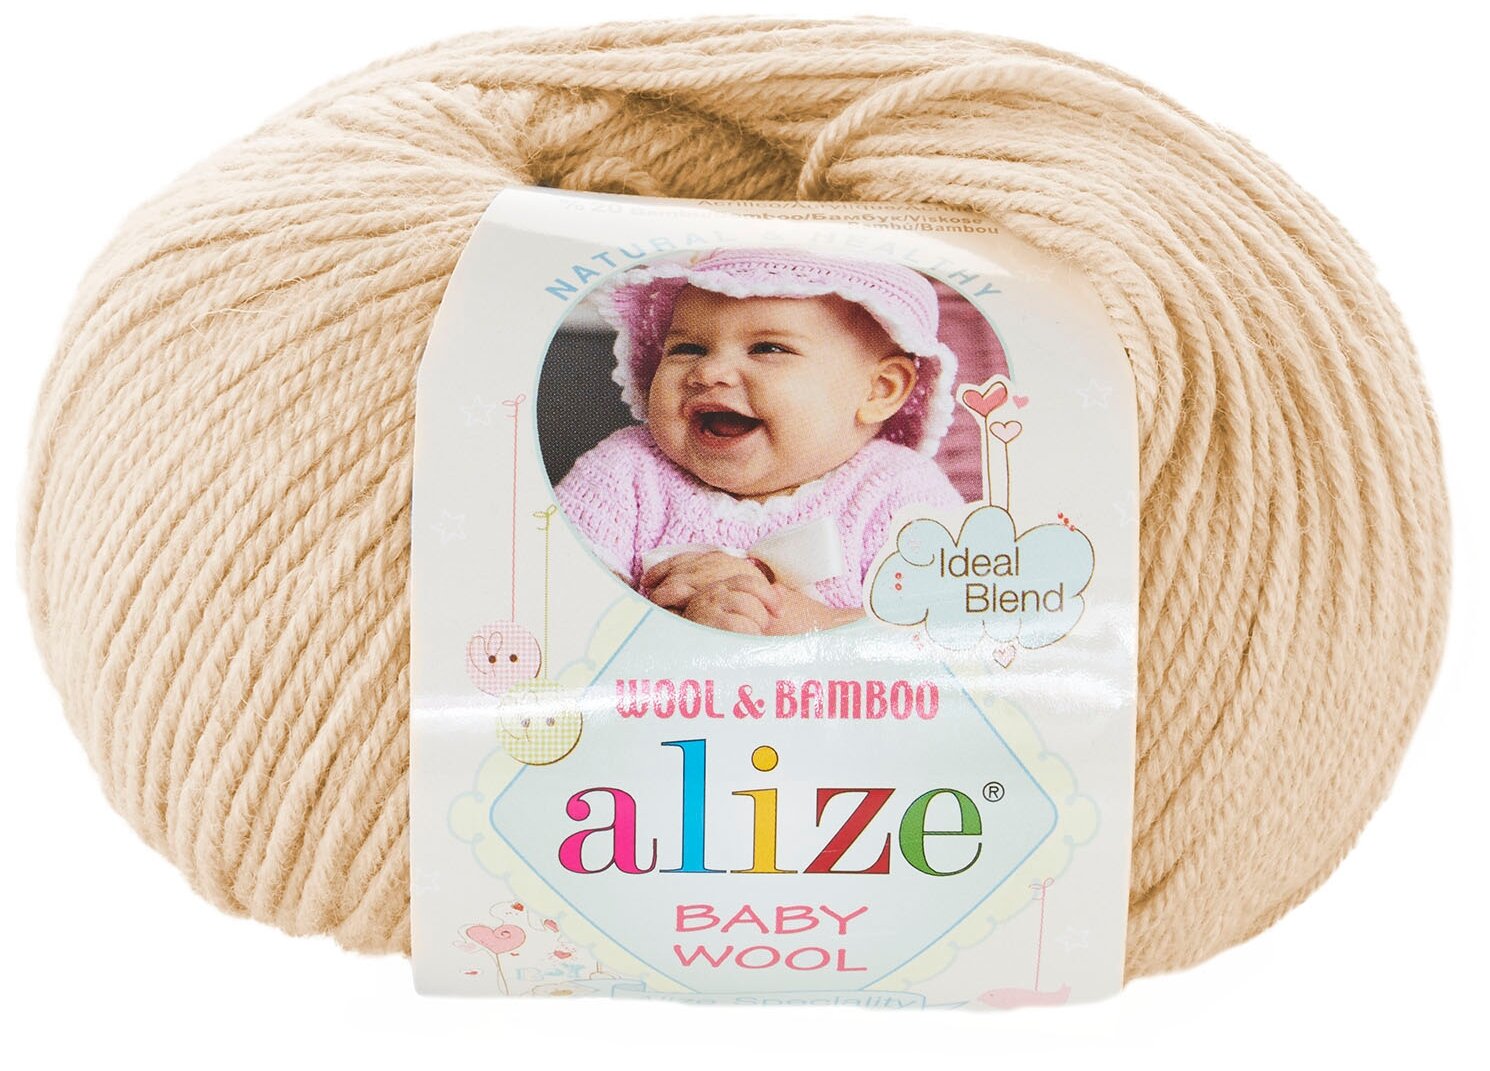    ALIZE 'Baby wool' 50. 175. (20%, 40%, 40%) (310 ), 10 